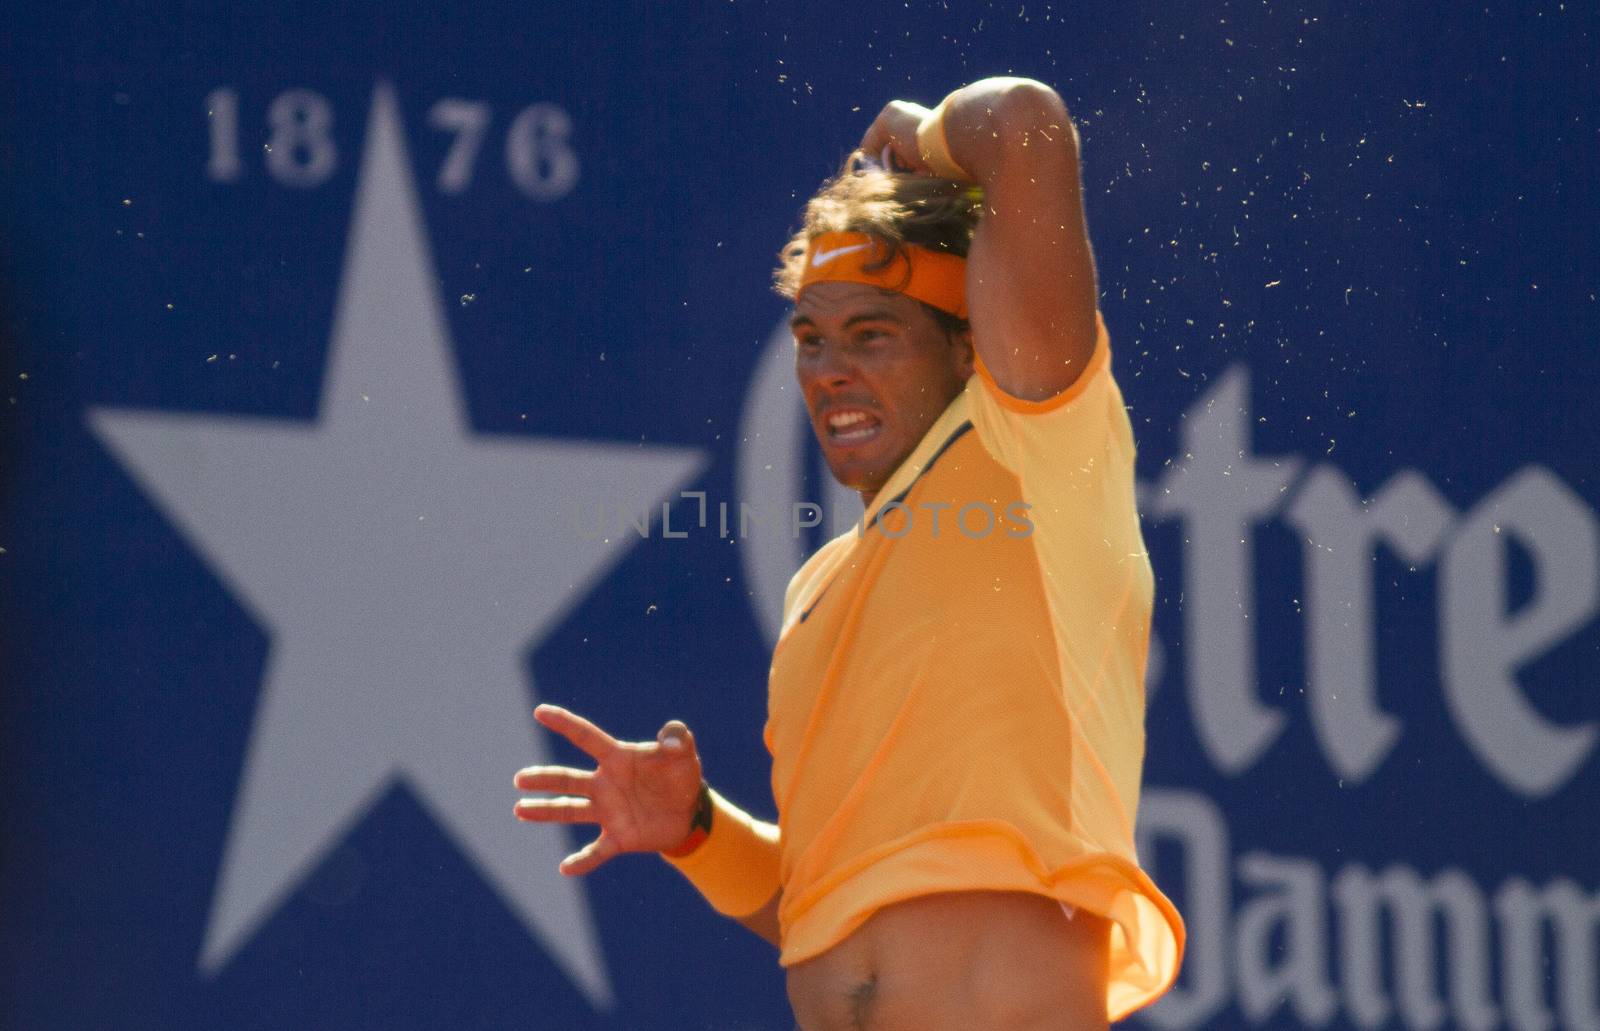 SPAIN, Barcelona: Spanish tennis player Rafael Nadal returns the ball to Japanese tennis player Kei Nishikori during the final of the ATP Barcelona Open Conde de Godo tennis tournament in Barcelona on April 24, 2015. Rafael Nadal equalled Argentine legend Guillermo Vilas's record of 49 clay-court titles with his ninth Barcelona Open after overcoming defending champion Kei Nishikori 6-4, 7-5 today. 